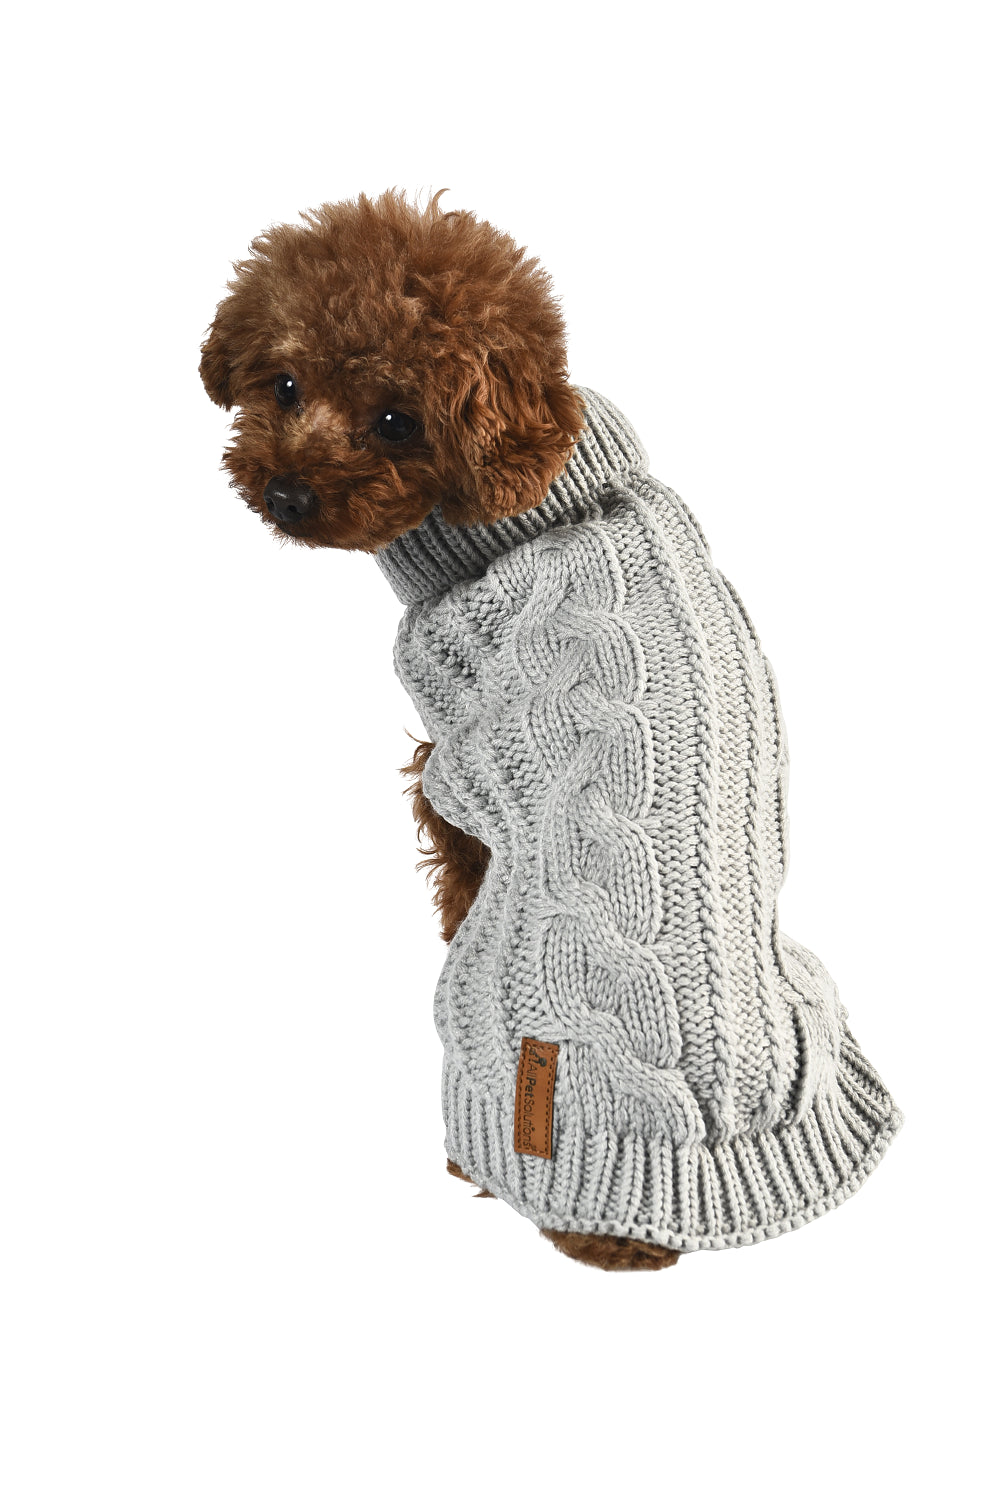 Dog Luxury Knitted Fitted Warm Jumper in Grey Brown Cream Sizes 25,35,40Cm S/M/L